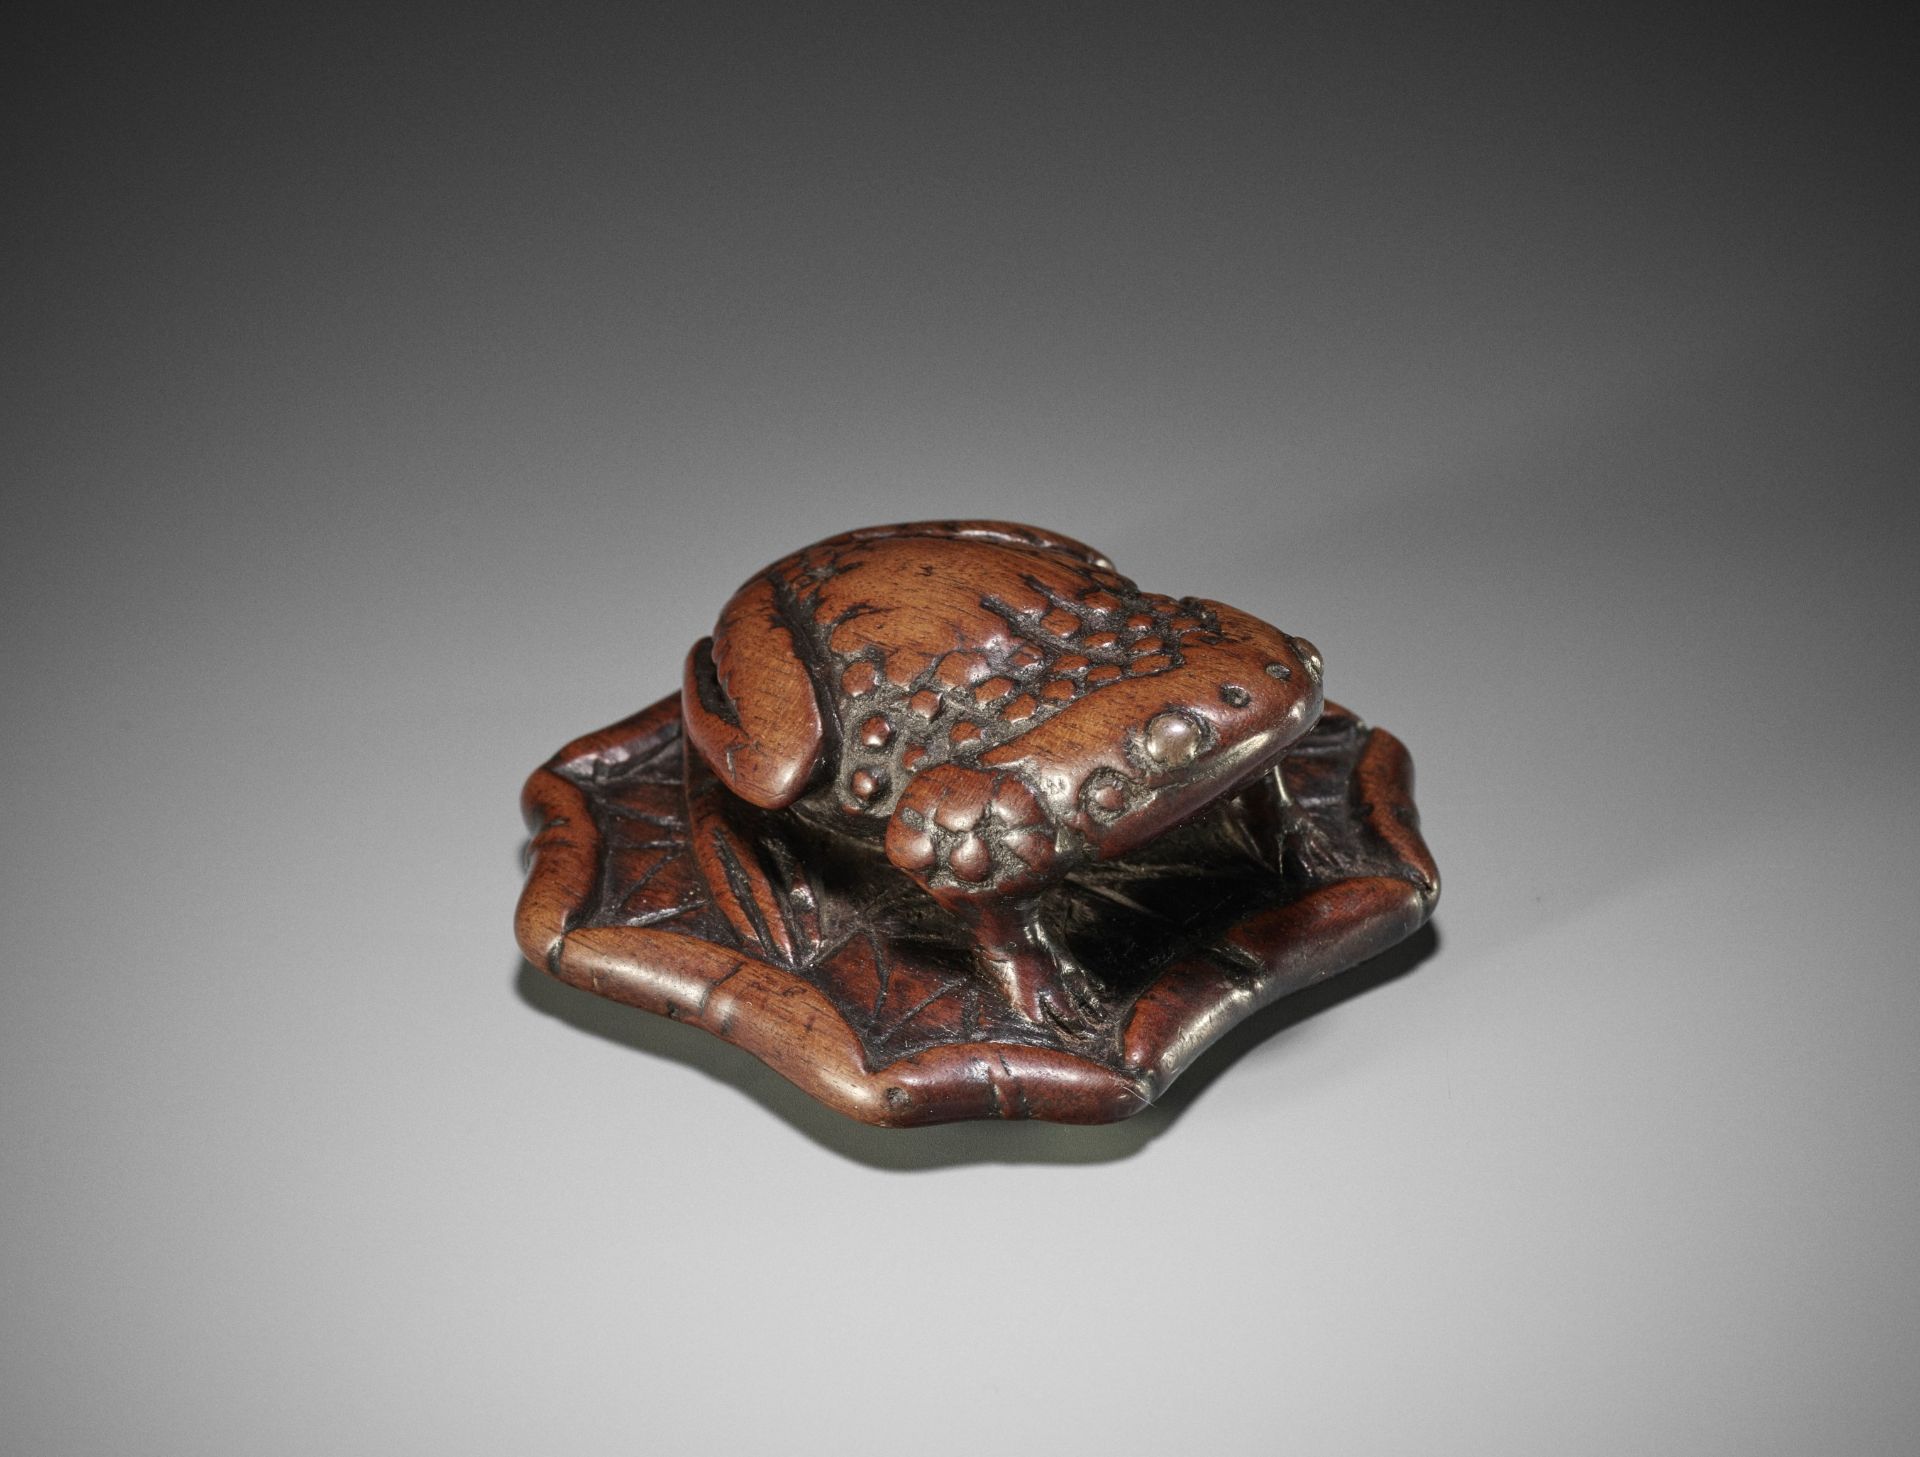 A LARGE AND UNUSUAL WOOD NETSUKE OF A TOAD ON A LOTUS LEAF